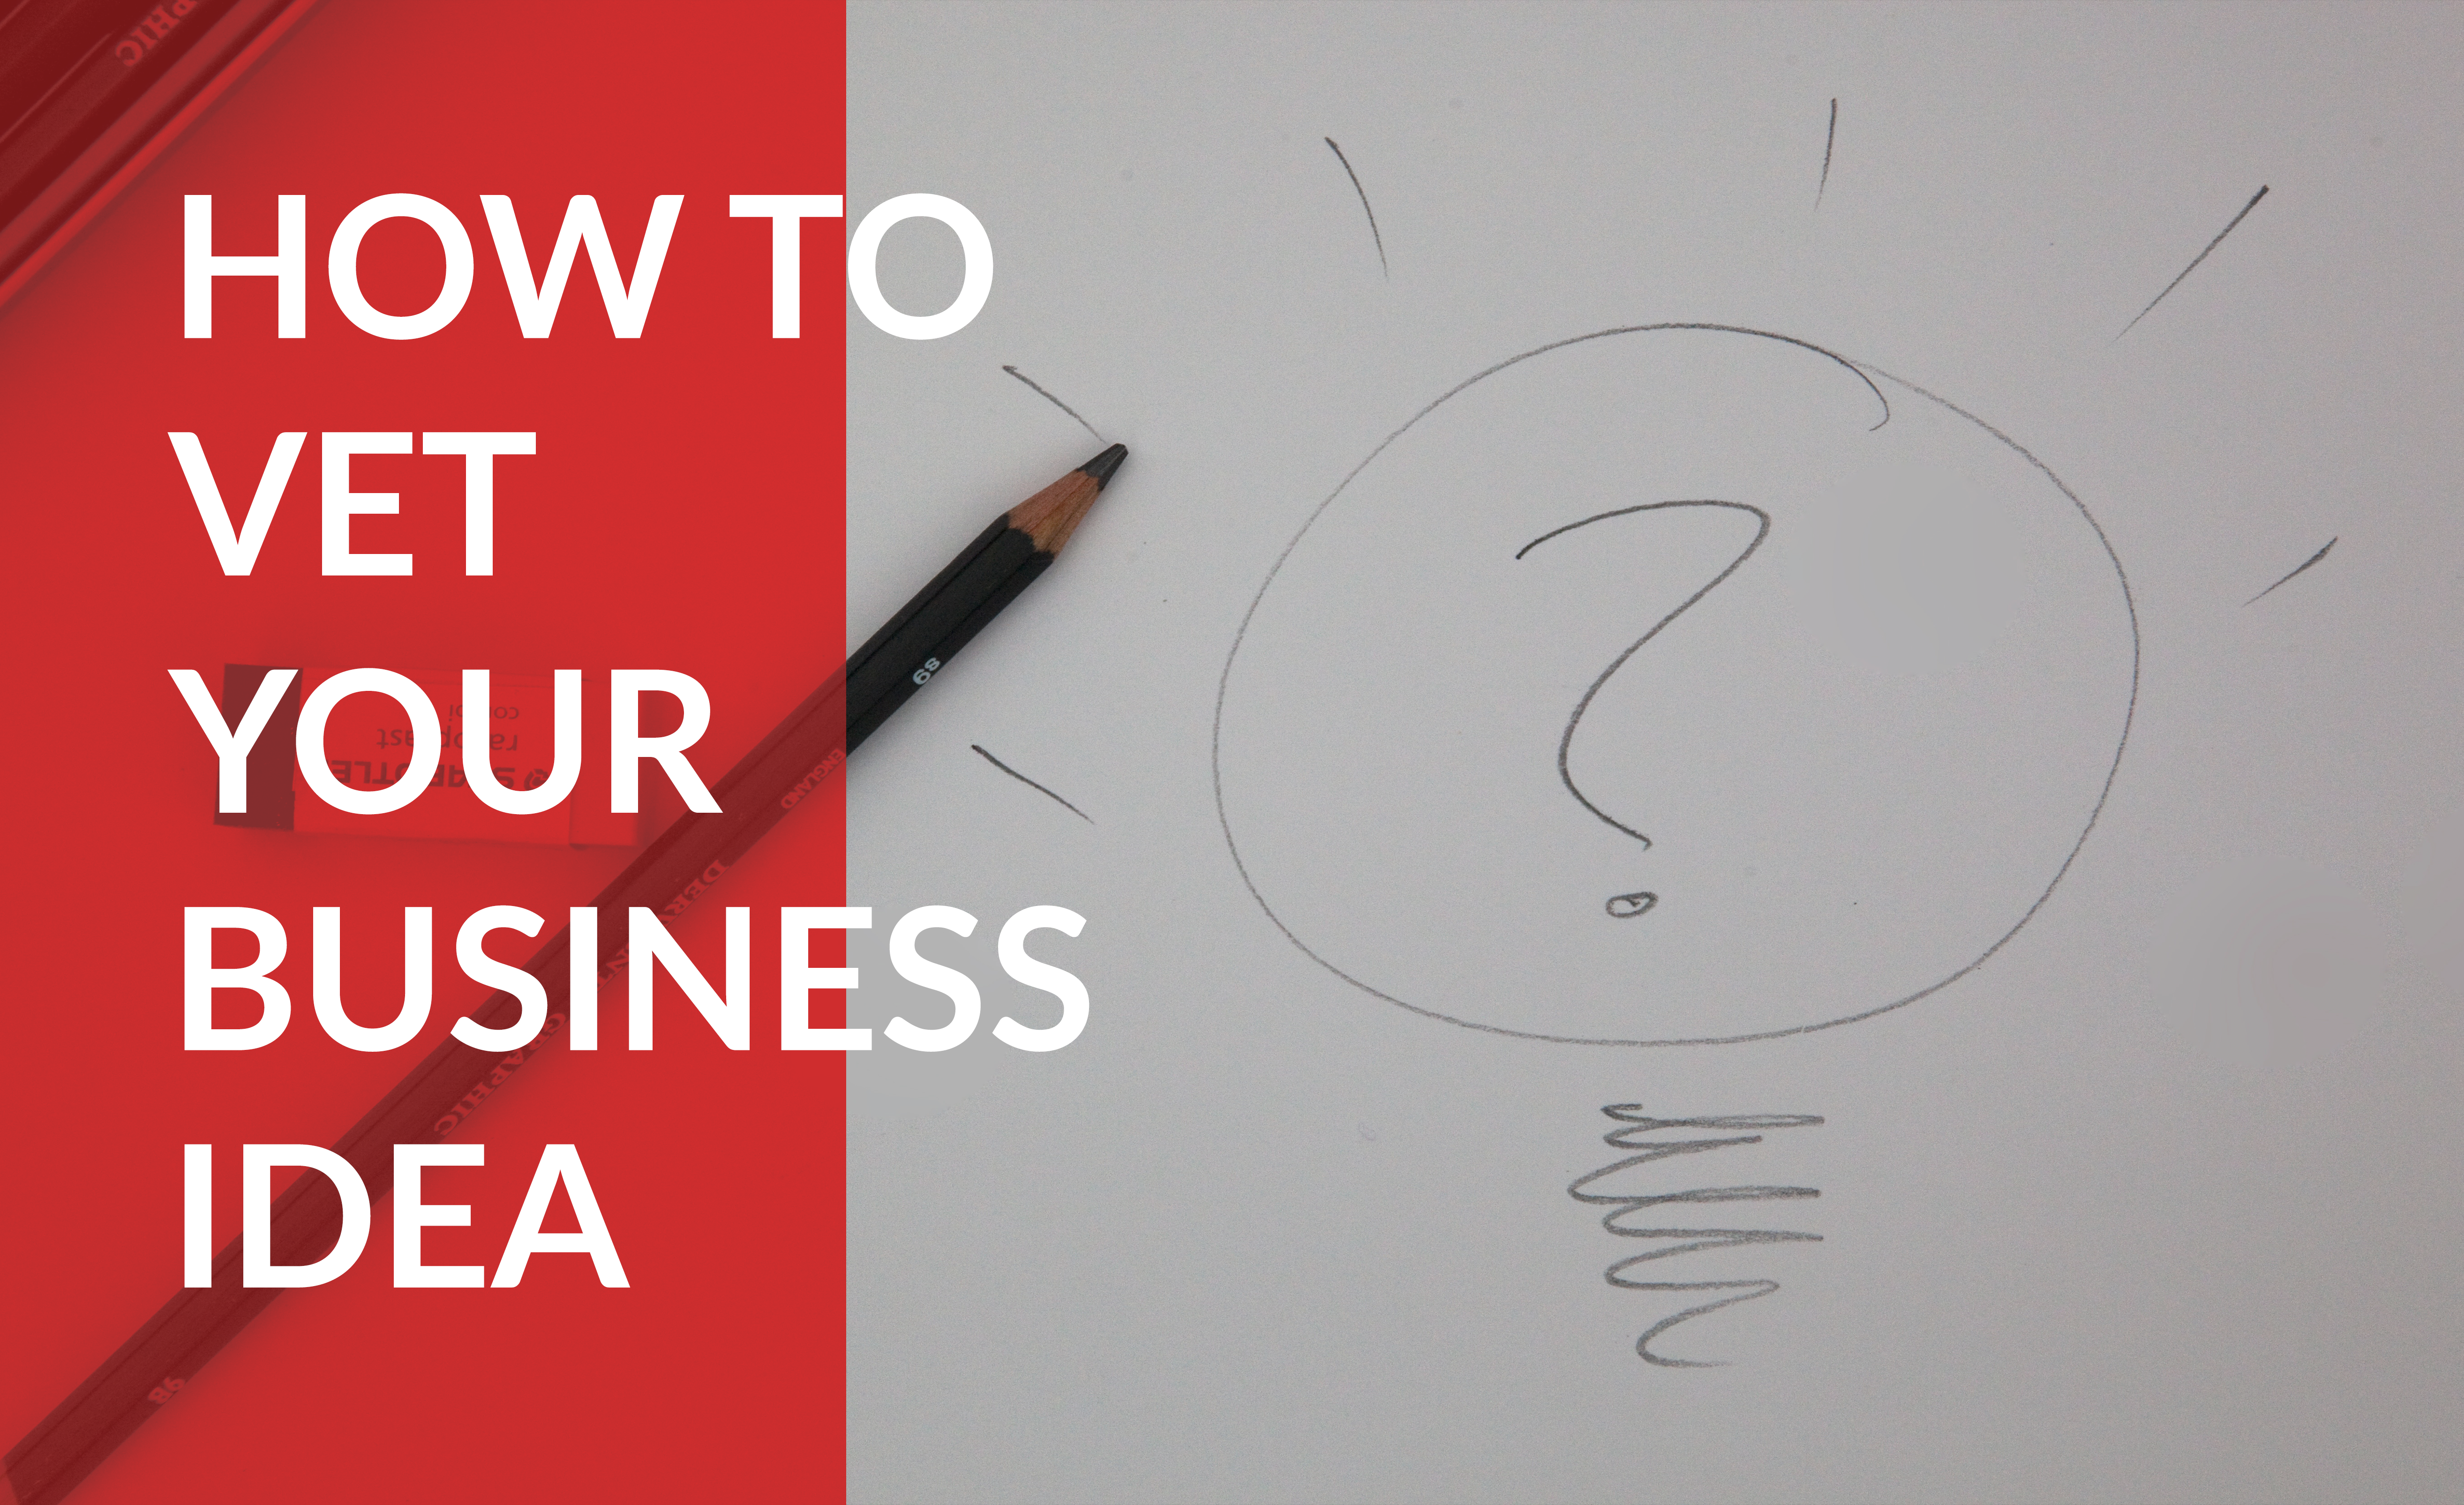 How to Vet Your Business Idea